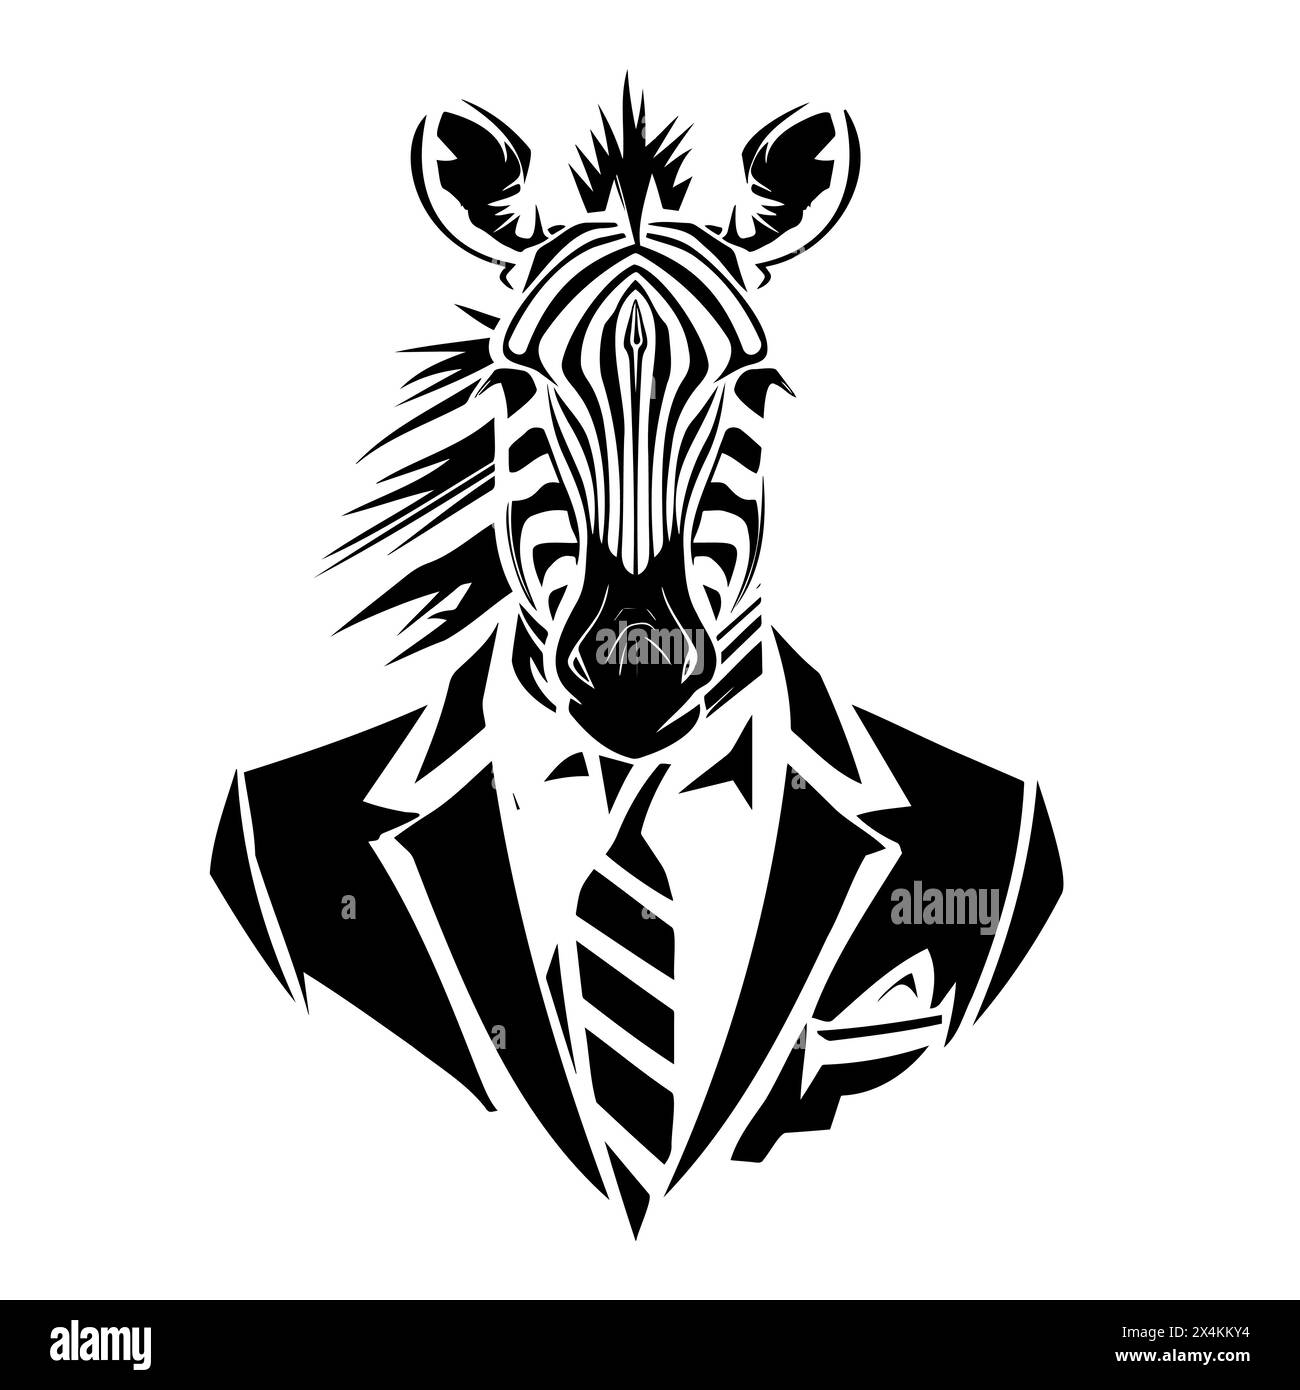 A zebra in a suit and tie with line art and stencil details Stock Vector